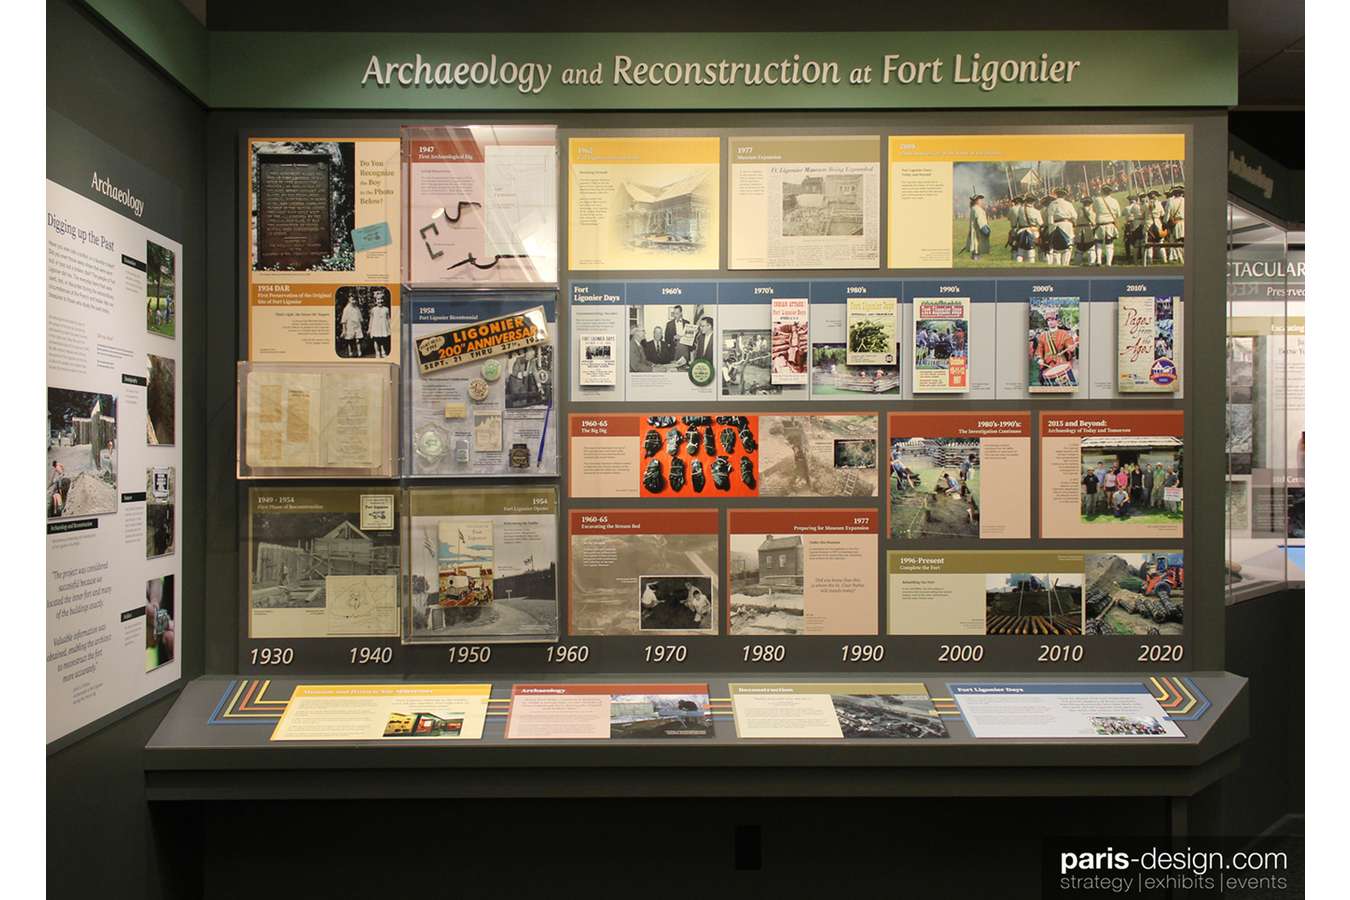 14W FTLIG Archeo Flat : Timeline shows major digs, museum and reconstruction milestones, and Ft. Ligonier Day festivities